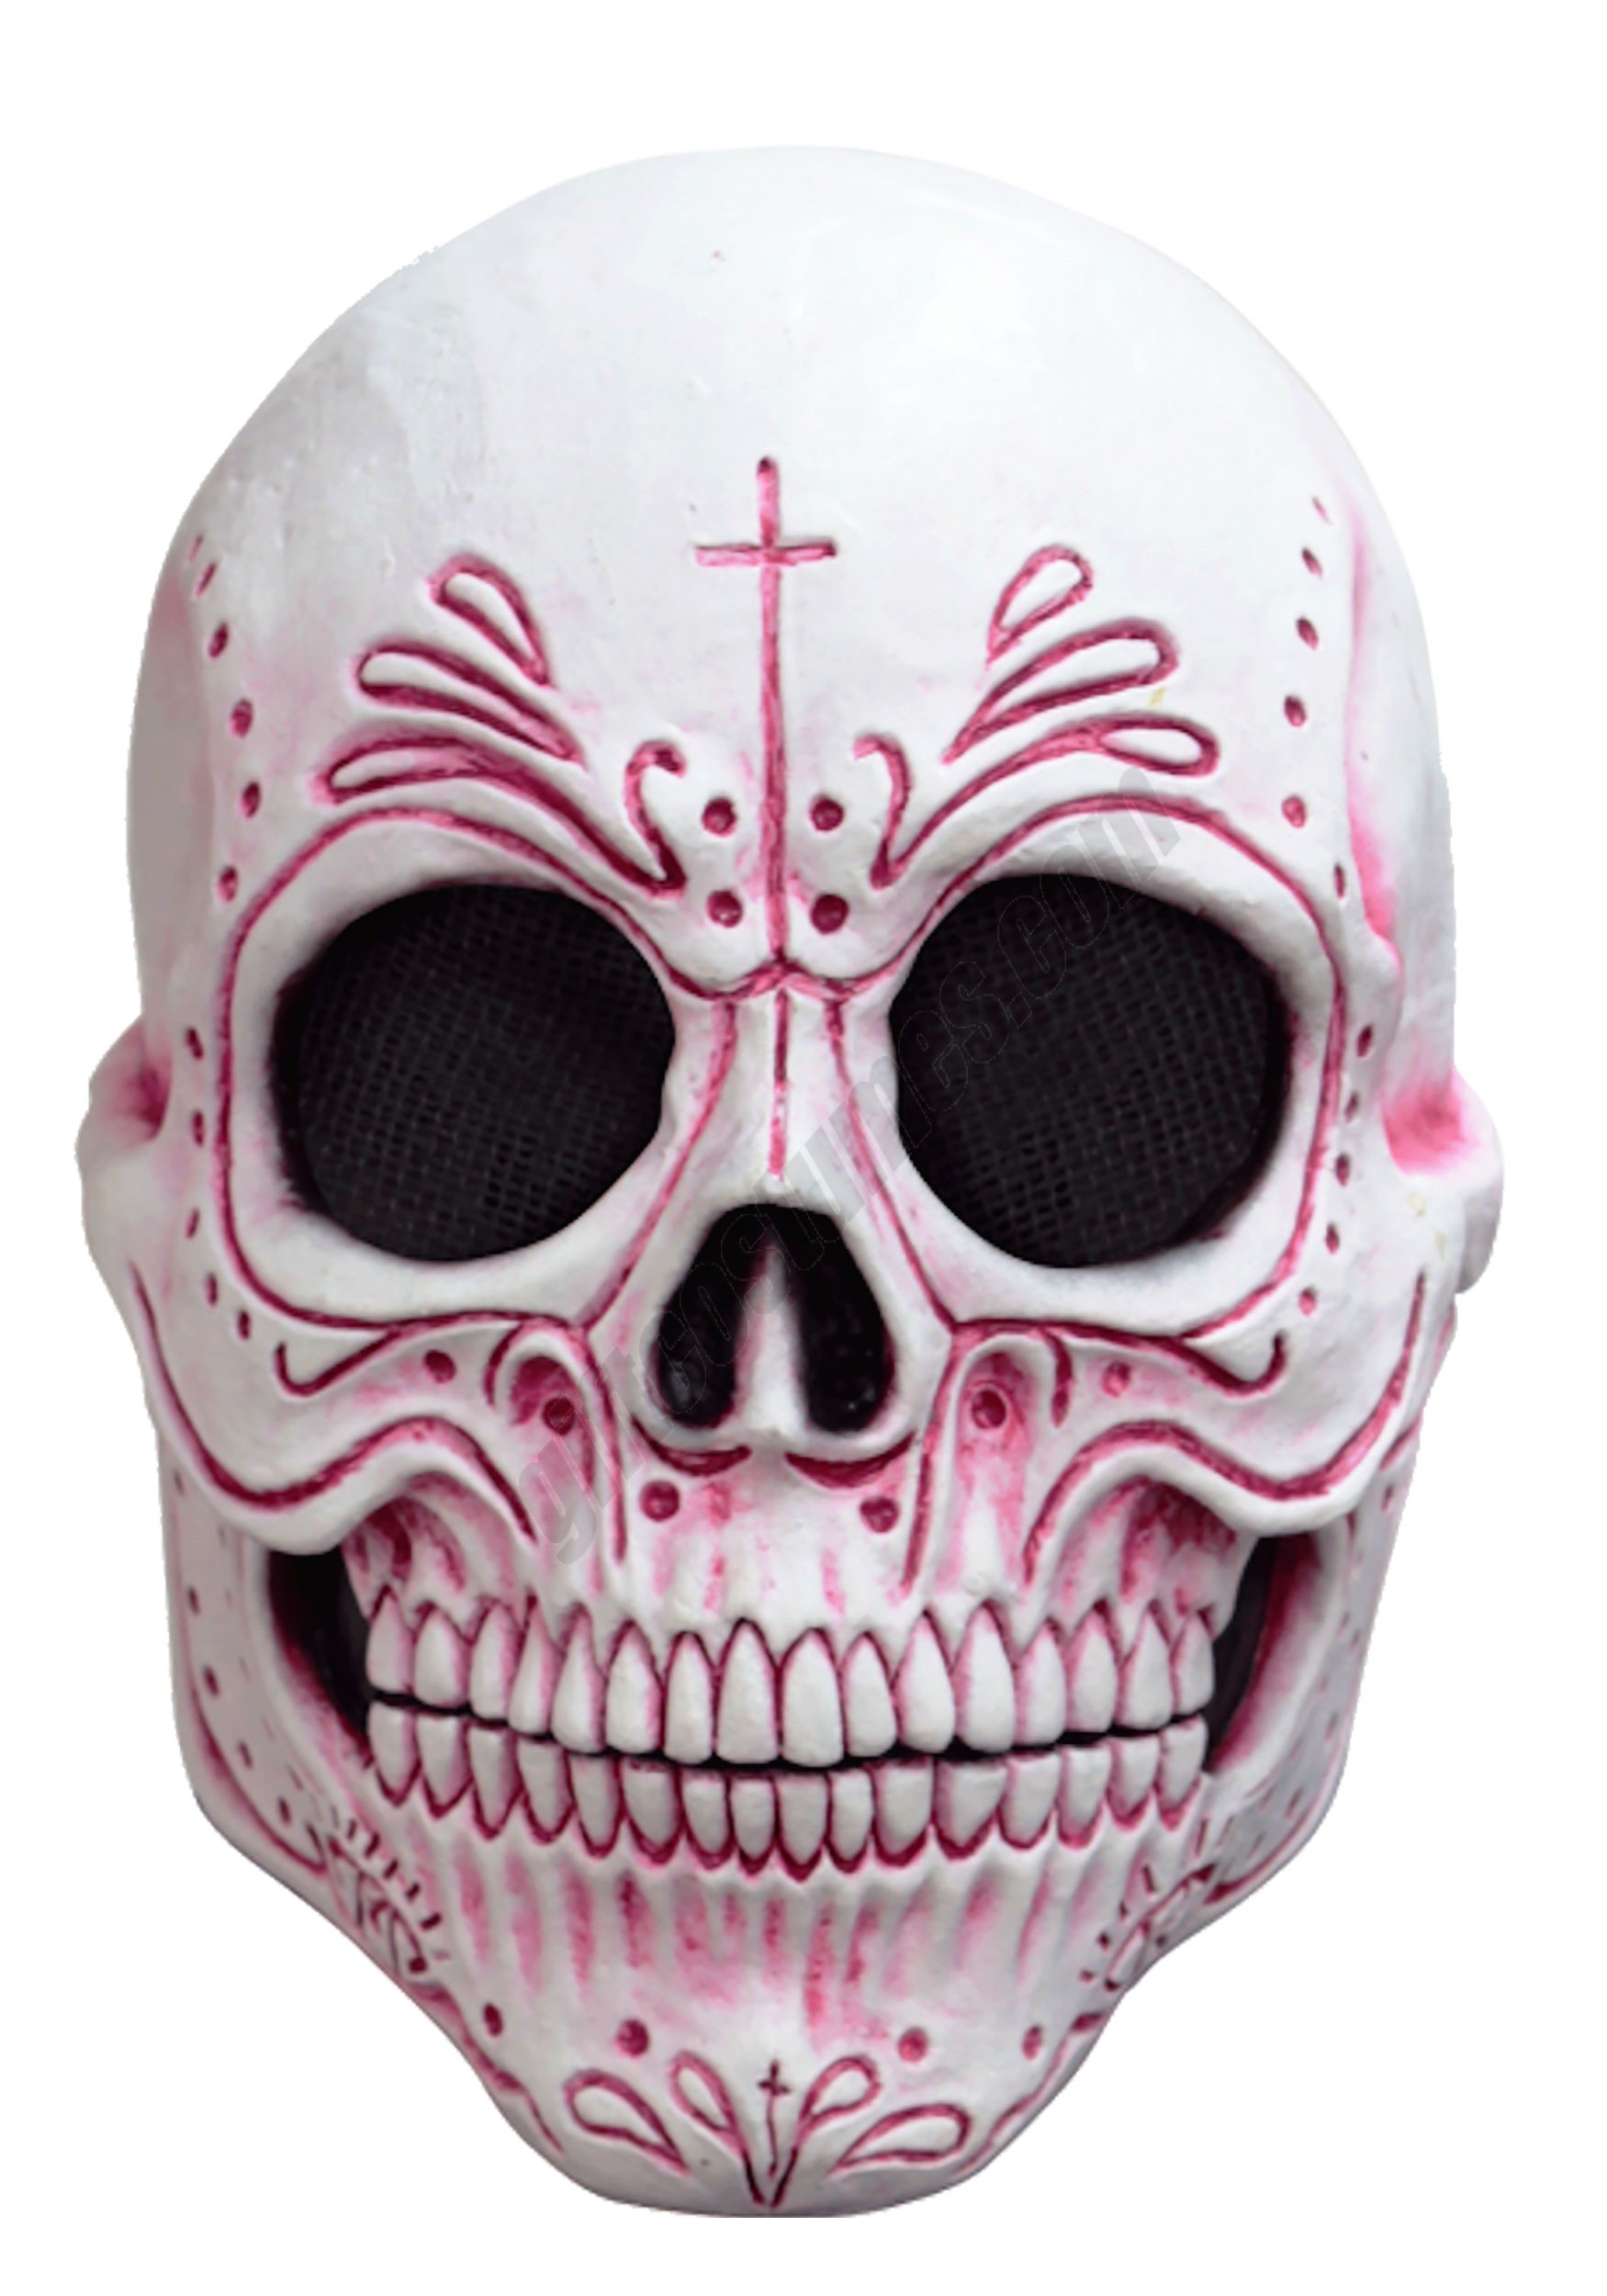 Mexican Catrina Skull Mask Promotions - Mexican Catrina Skull Mask Promotions